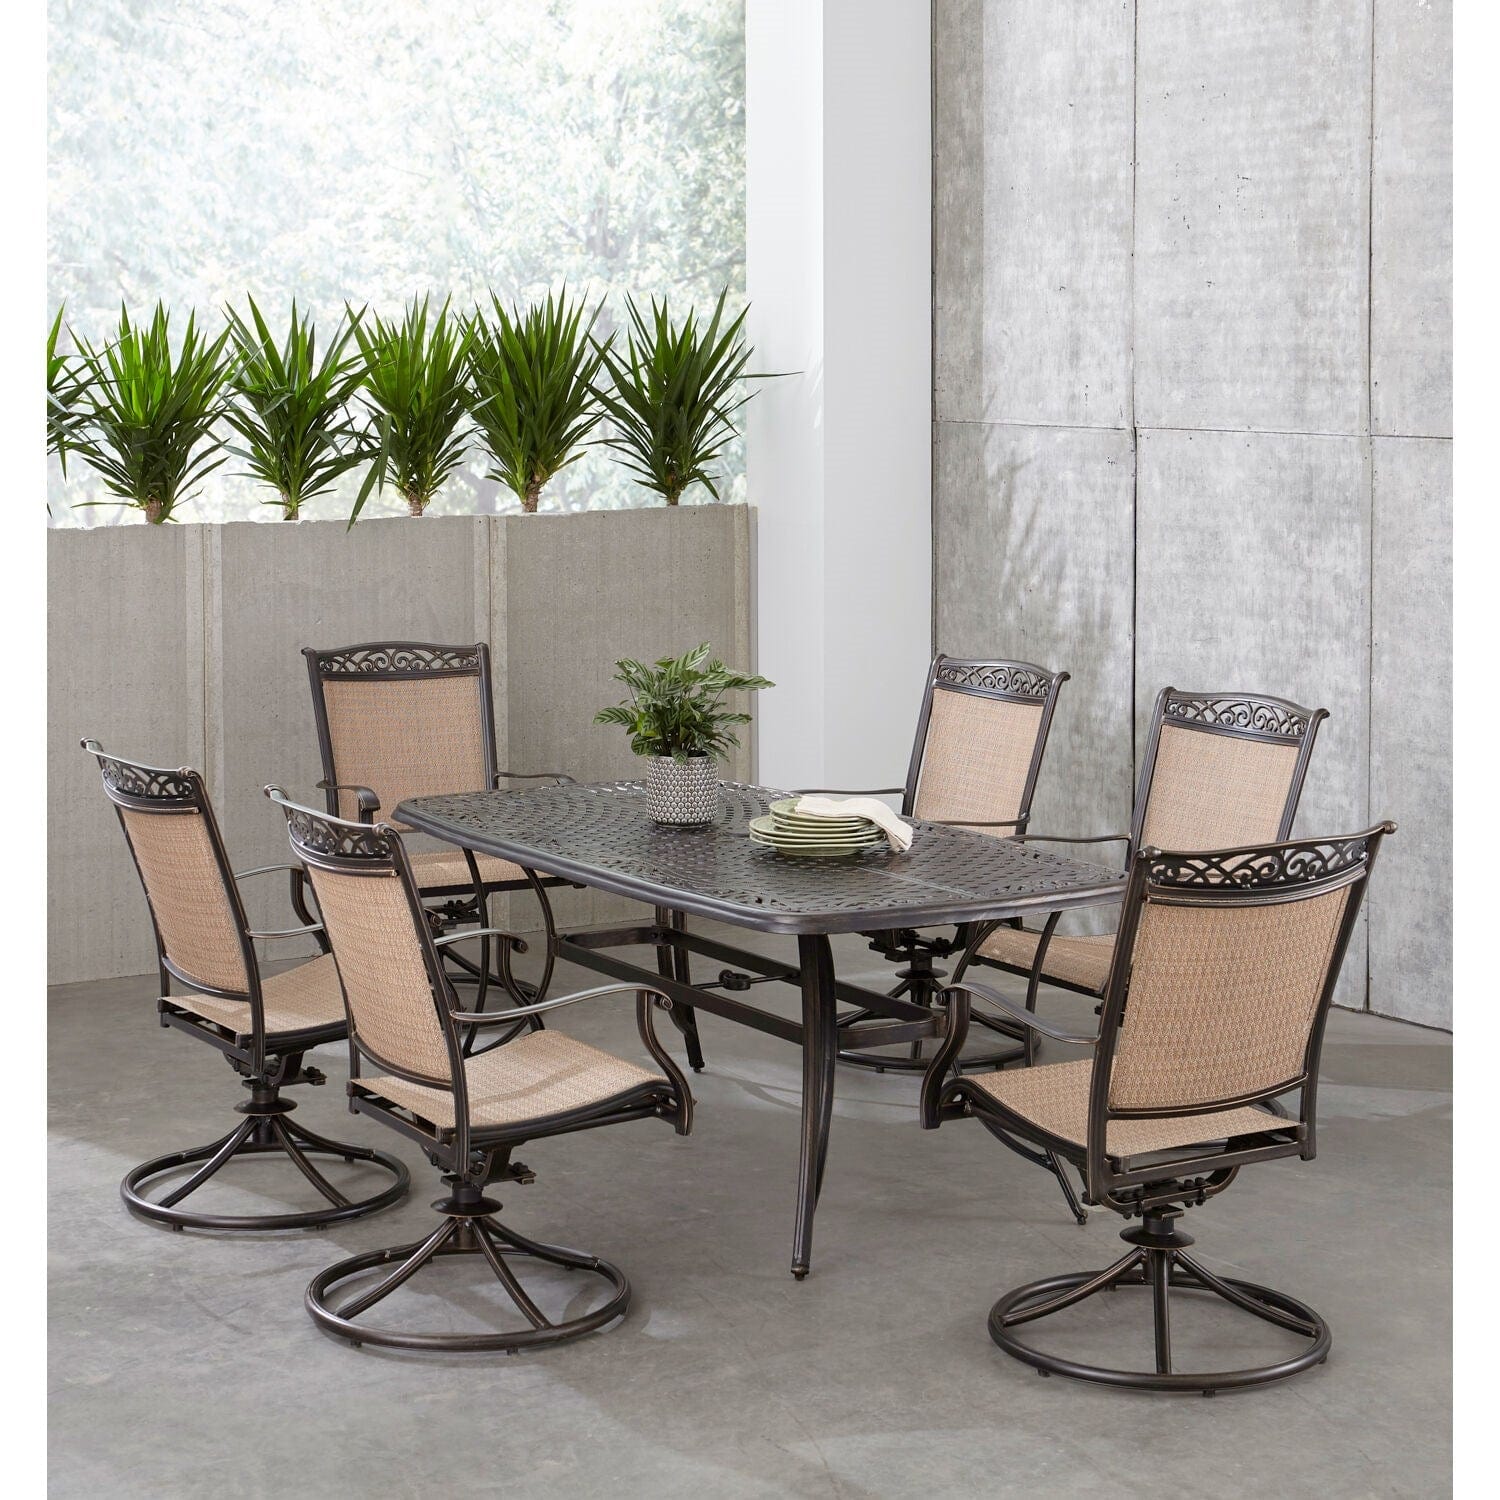 Hanover Outdoor Dining Set Hanover - Fontana 7 Piece Outdoor Dining Set with 6 Sling Swivel Rockers and a 38-In. x 72-In. Cast-Top Table | FNTDN7PCSWC